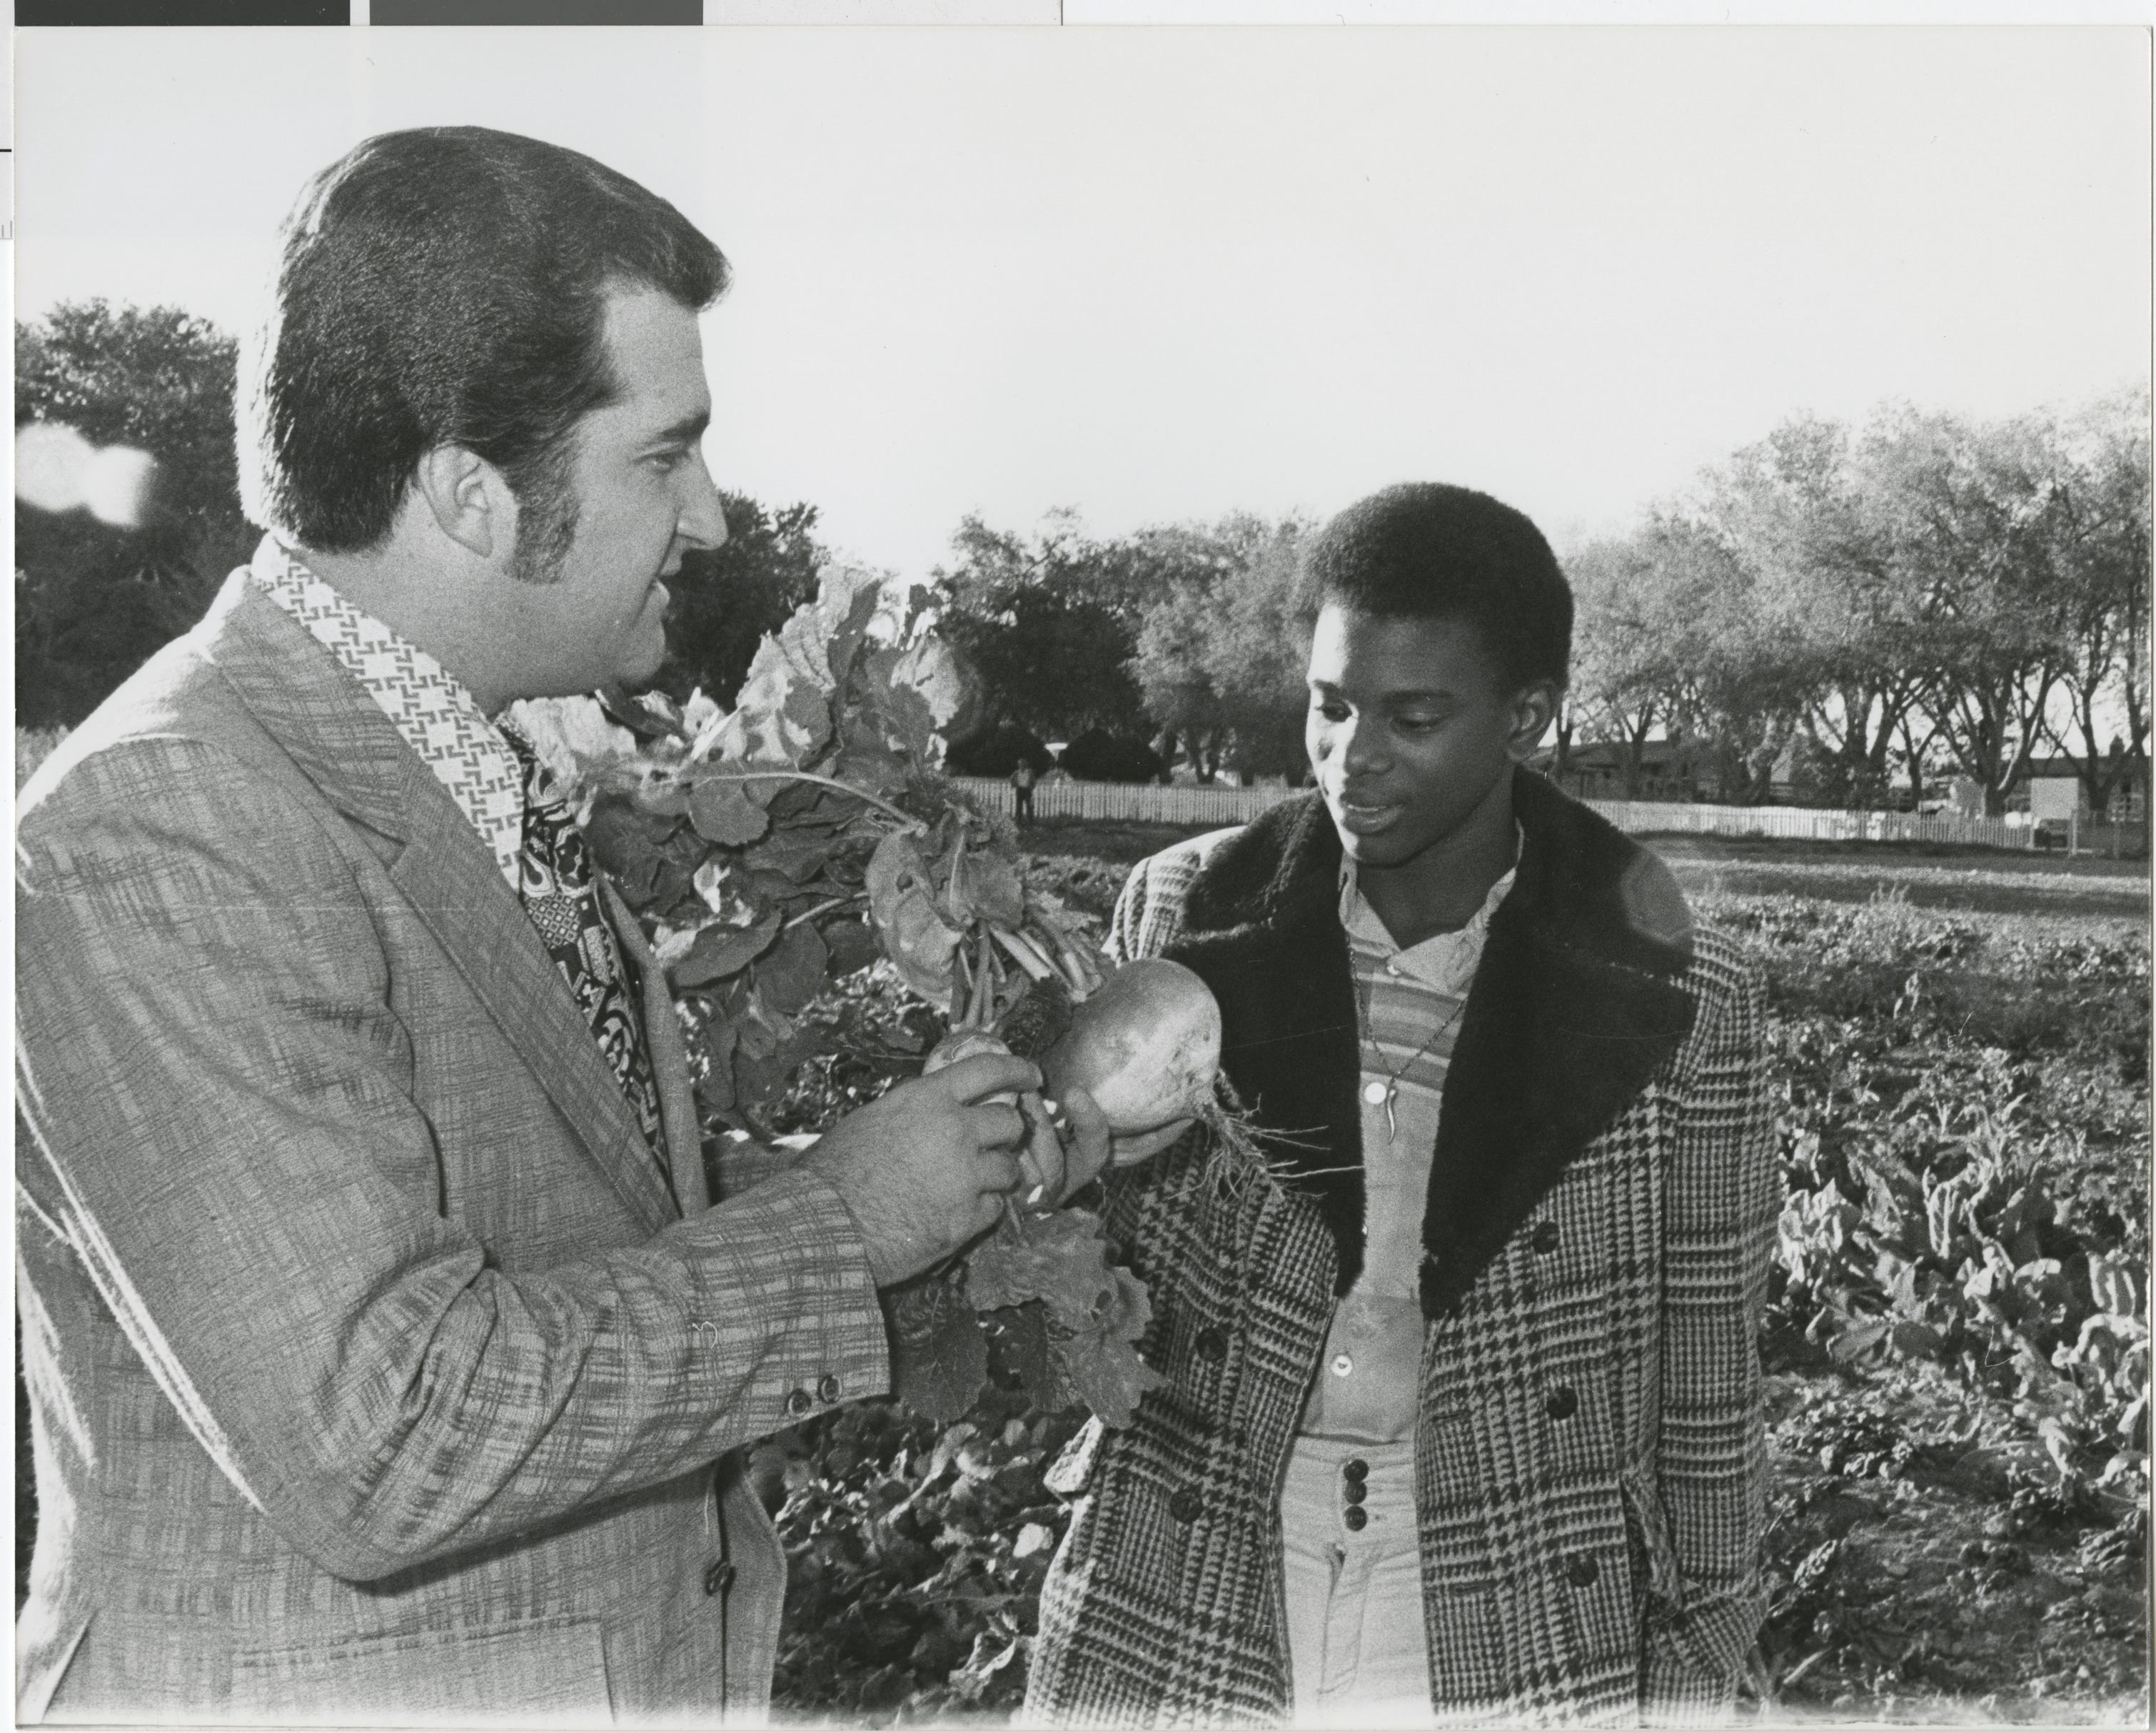 Photograph of Ron Lurie at a community garden